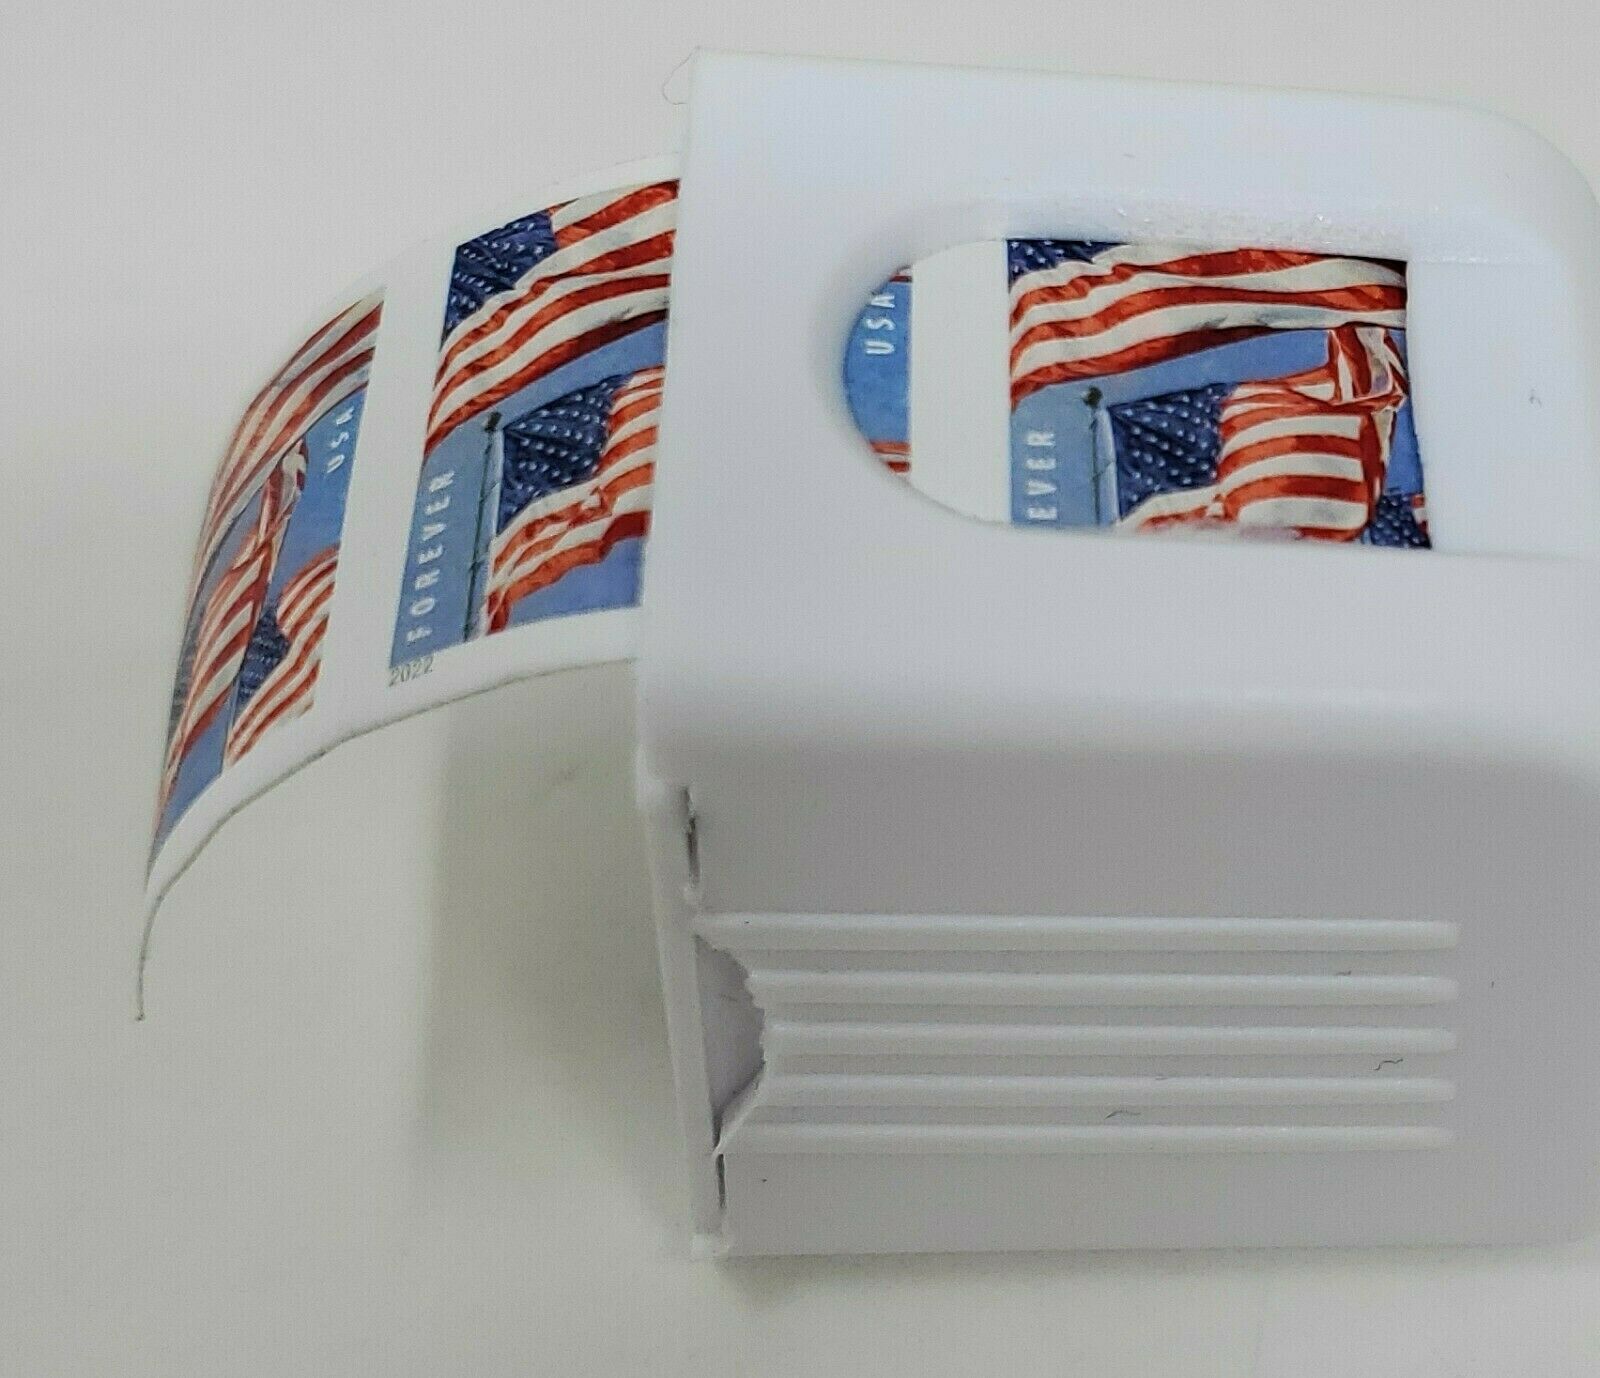 Postage Stamp Holding Dispenser for Roll of 100 Stamps US Forever Stamps US  